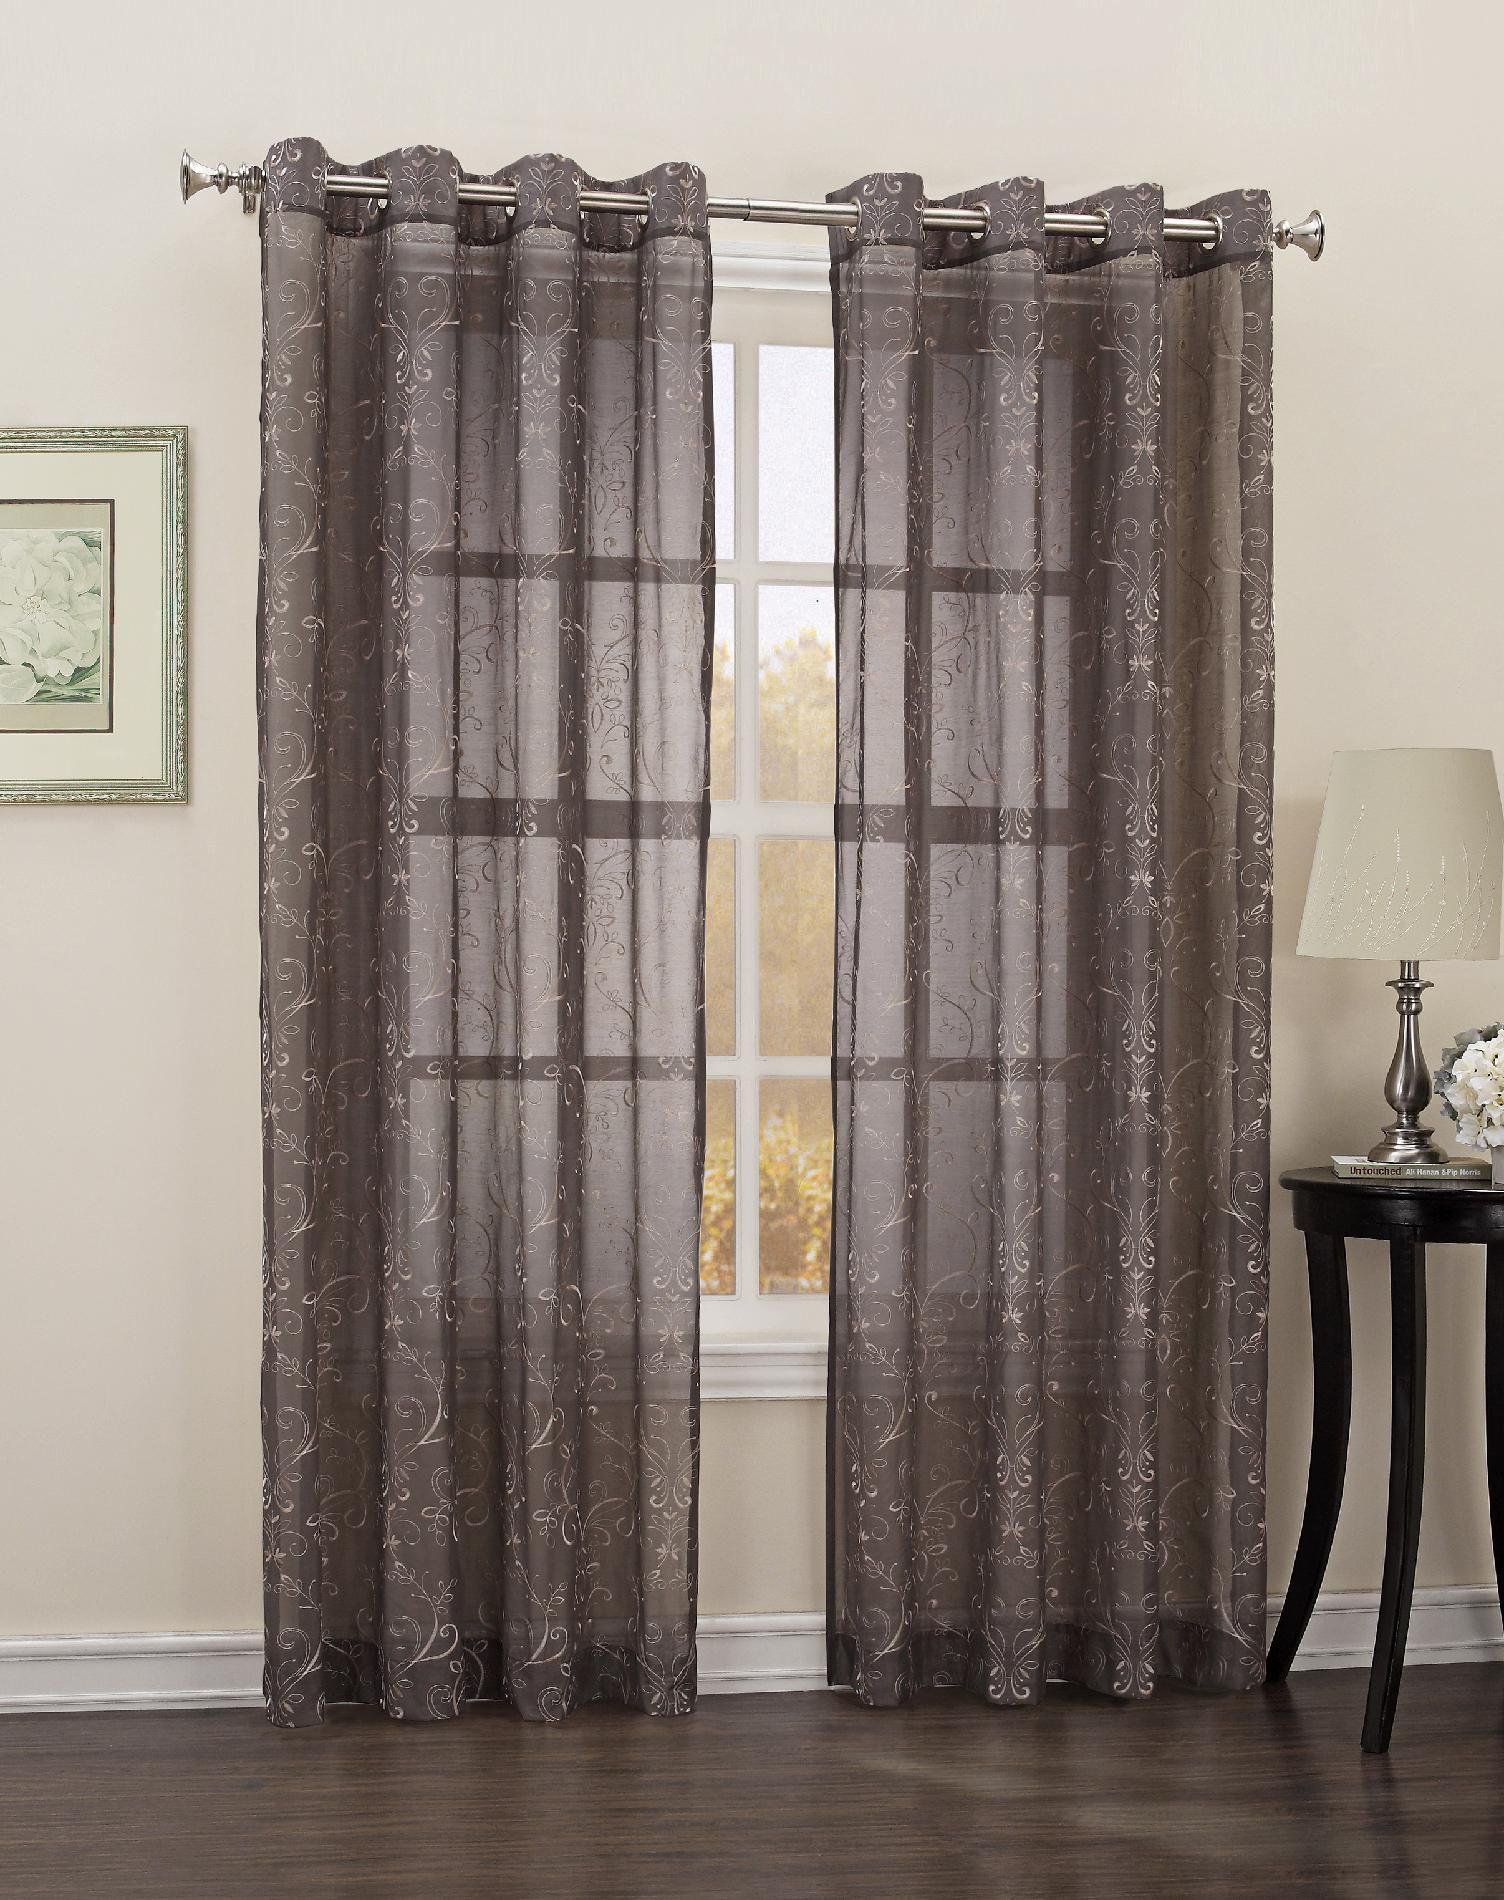 Simply Window Grace Grommet Curtain Panel - Scroll Embroidery